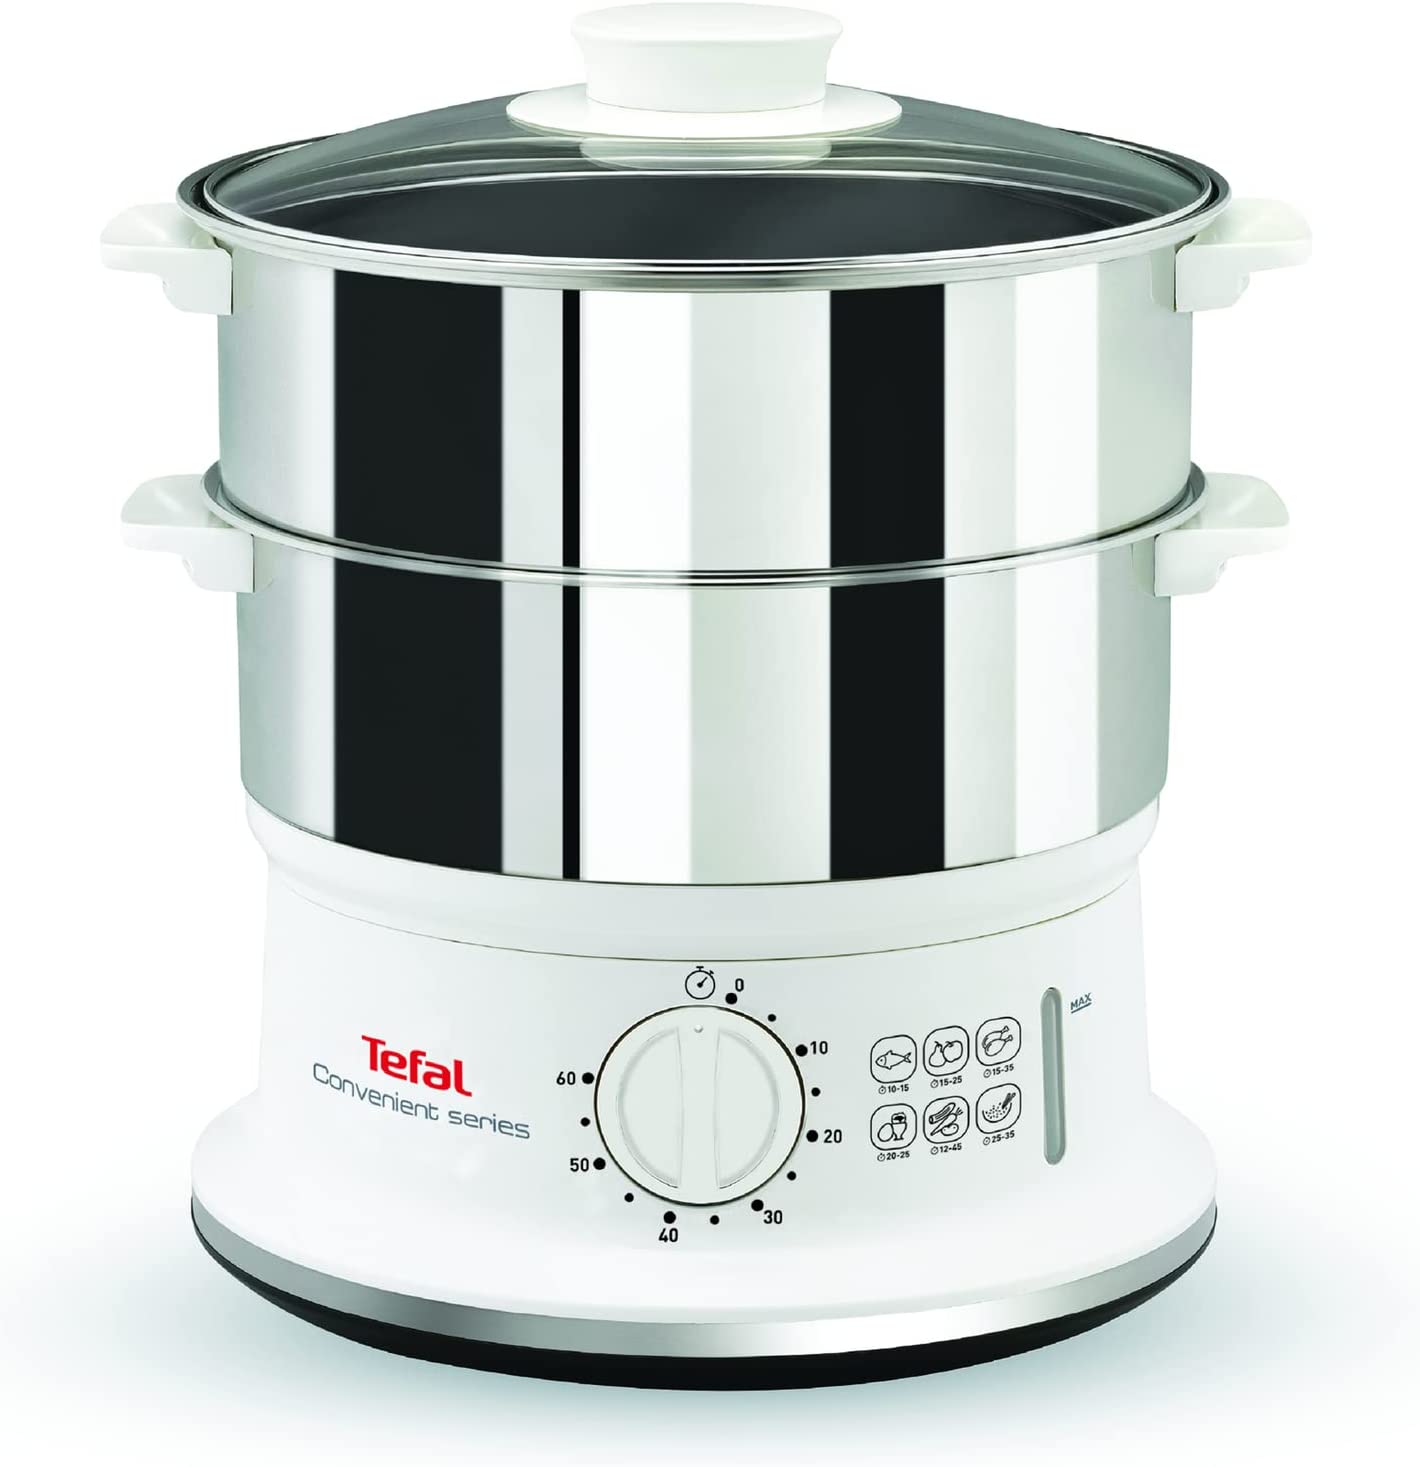 Tefal Convenient Series Stainless Steel Steamer VC145140